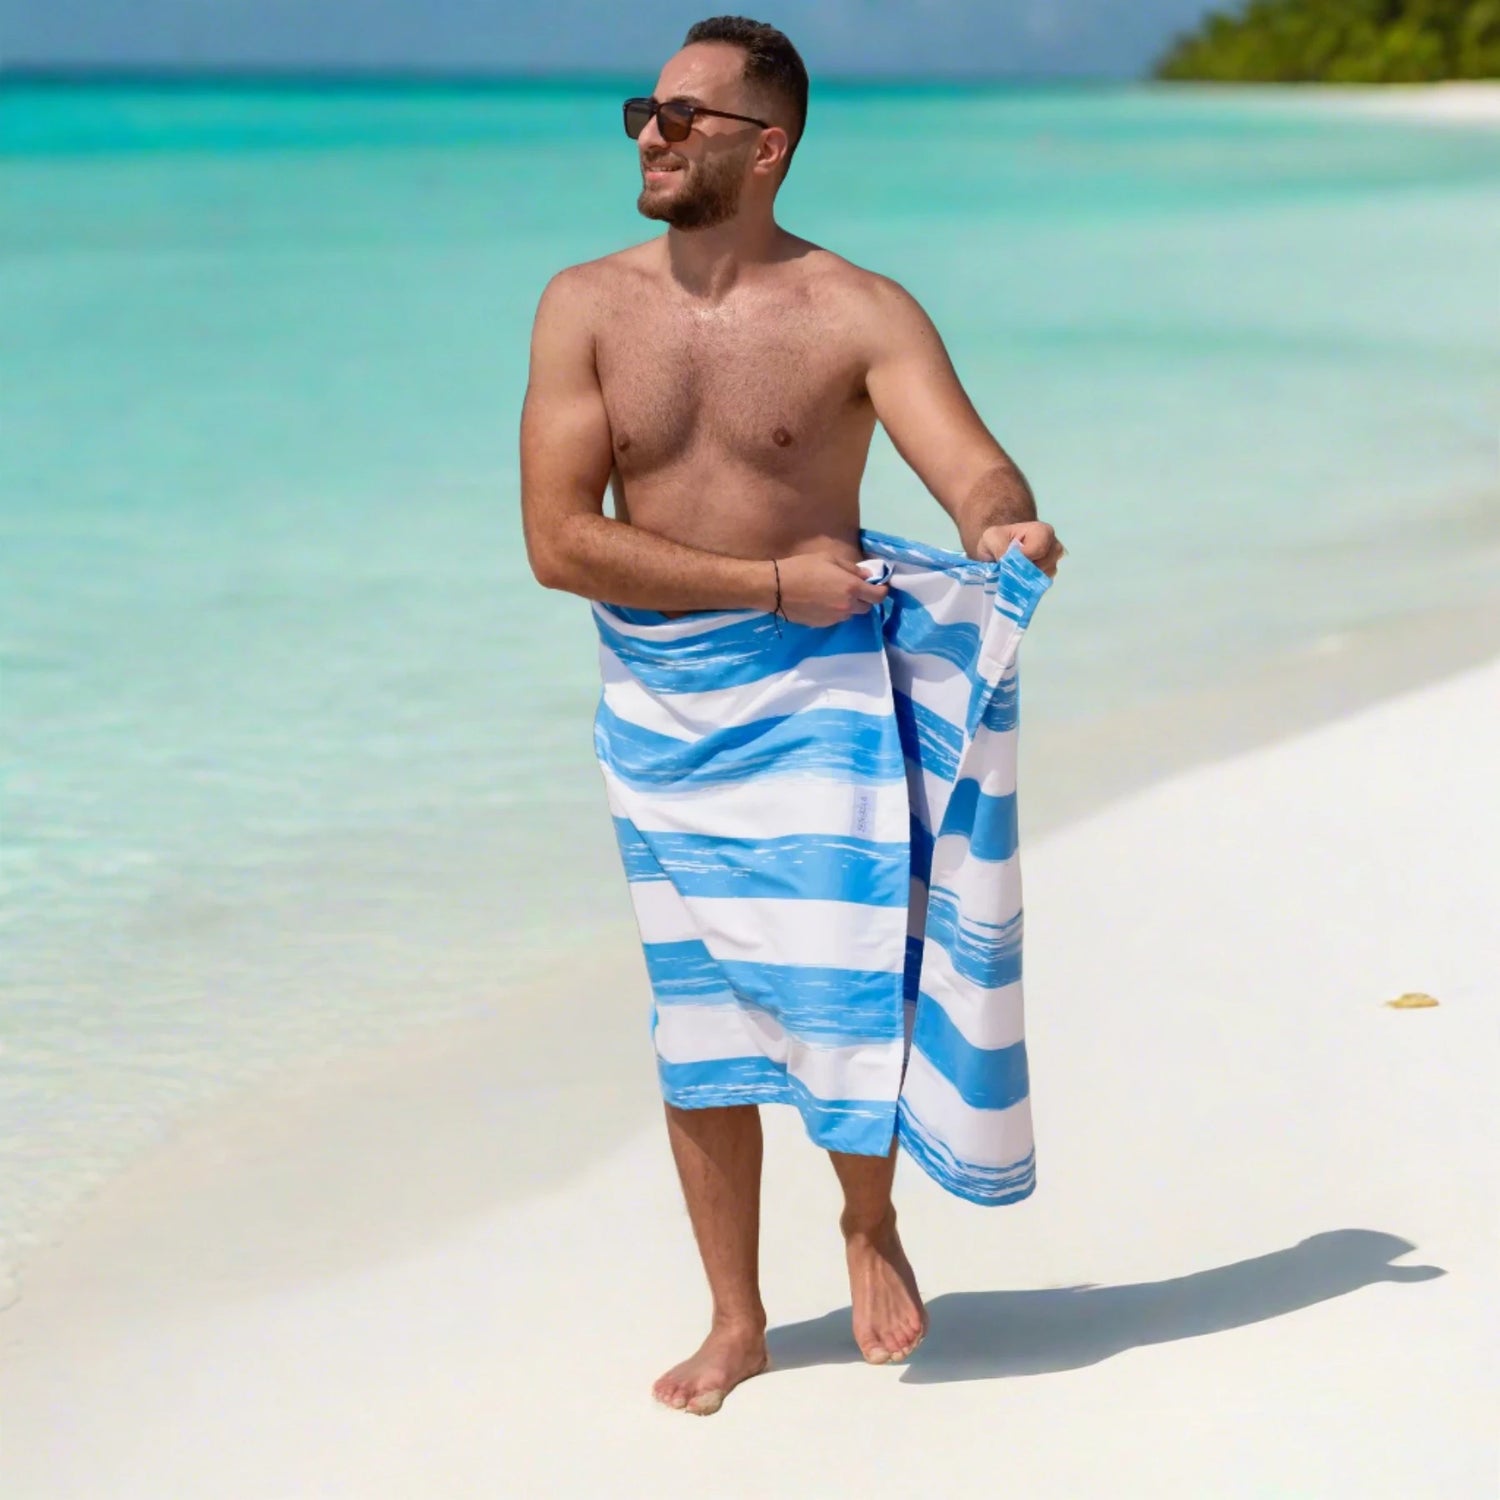 A guy wrapping himself with a Quick Dry, Sand Free, Light Weight, Compact and Ecofriendly Microfiber Beach Towel from La Toalla